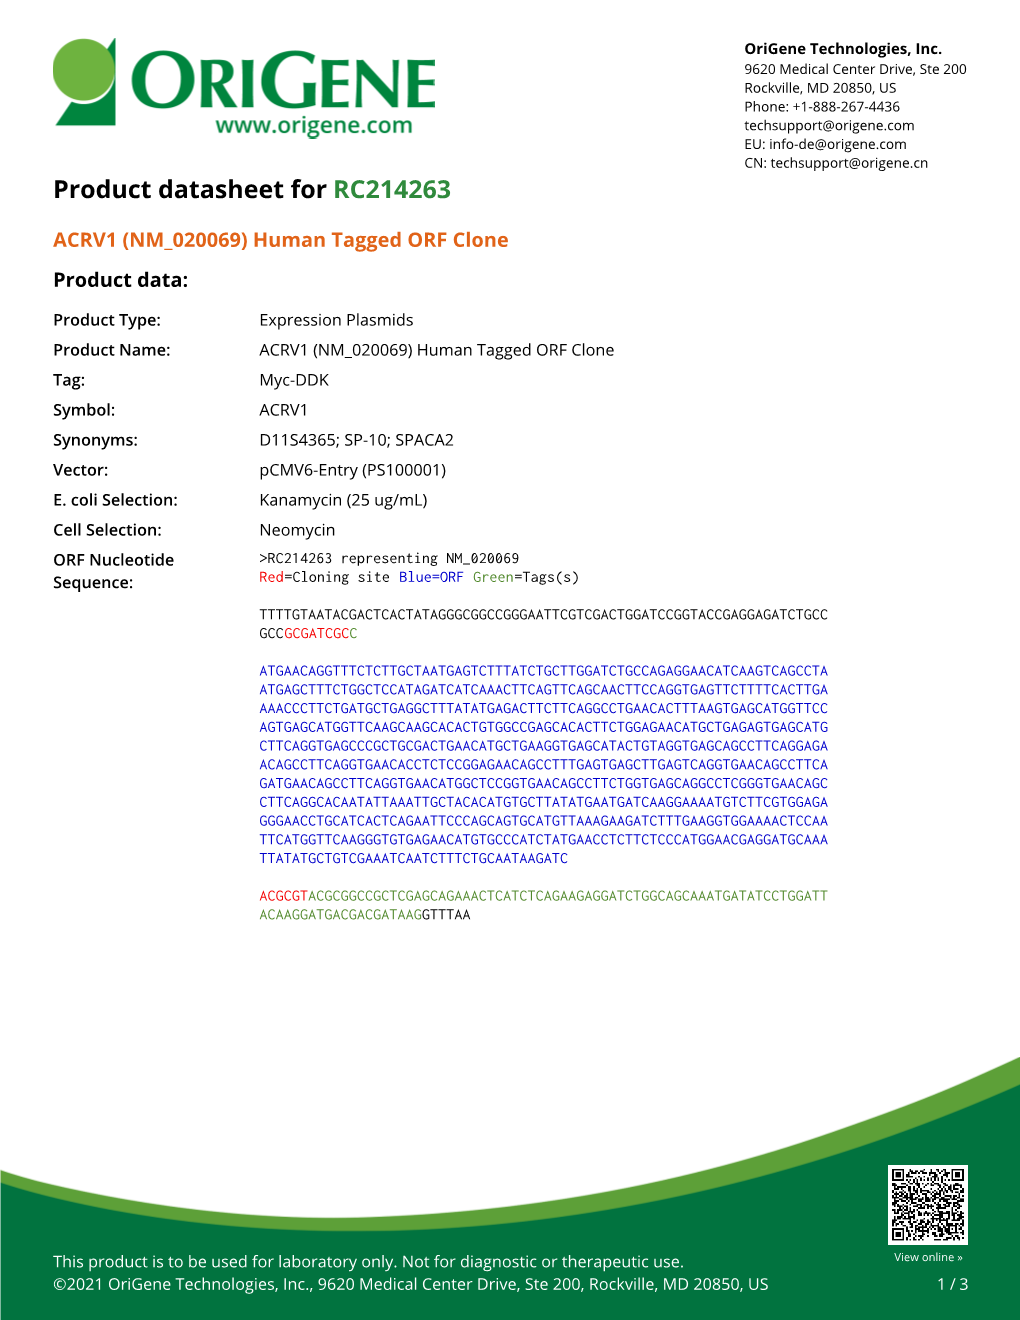 ACRV1 (NM 020069) Human Tagged ORF Clone Product Data